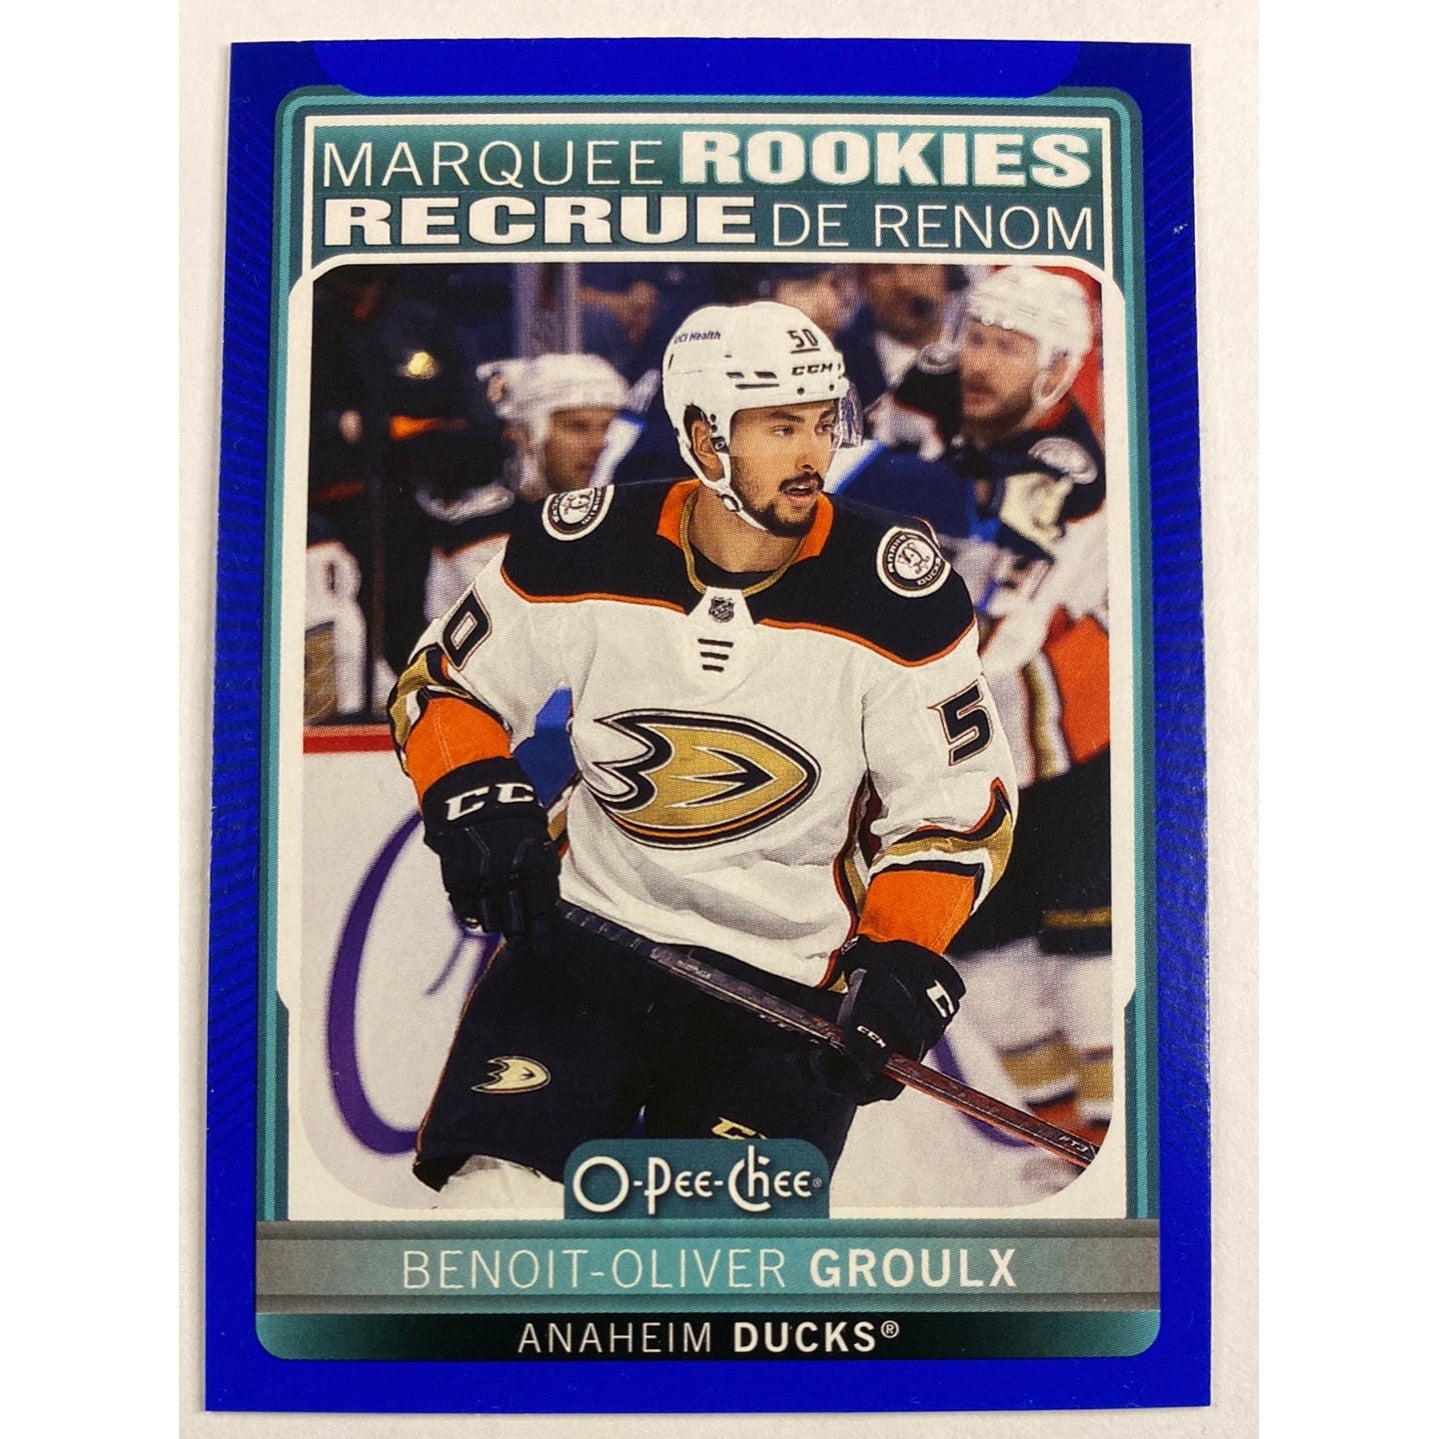 2021-22 O-Pee-Chee Benoit-Olivier Groulx Blue Boarder Marquee Rookies